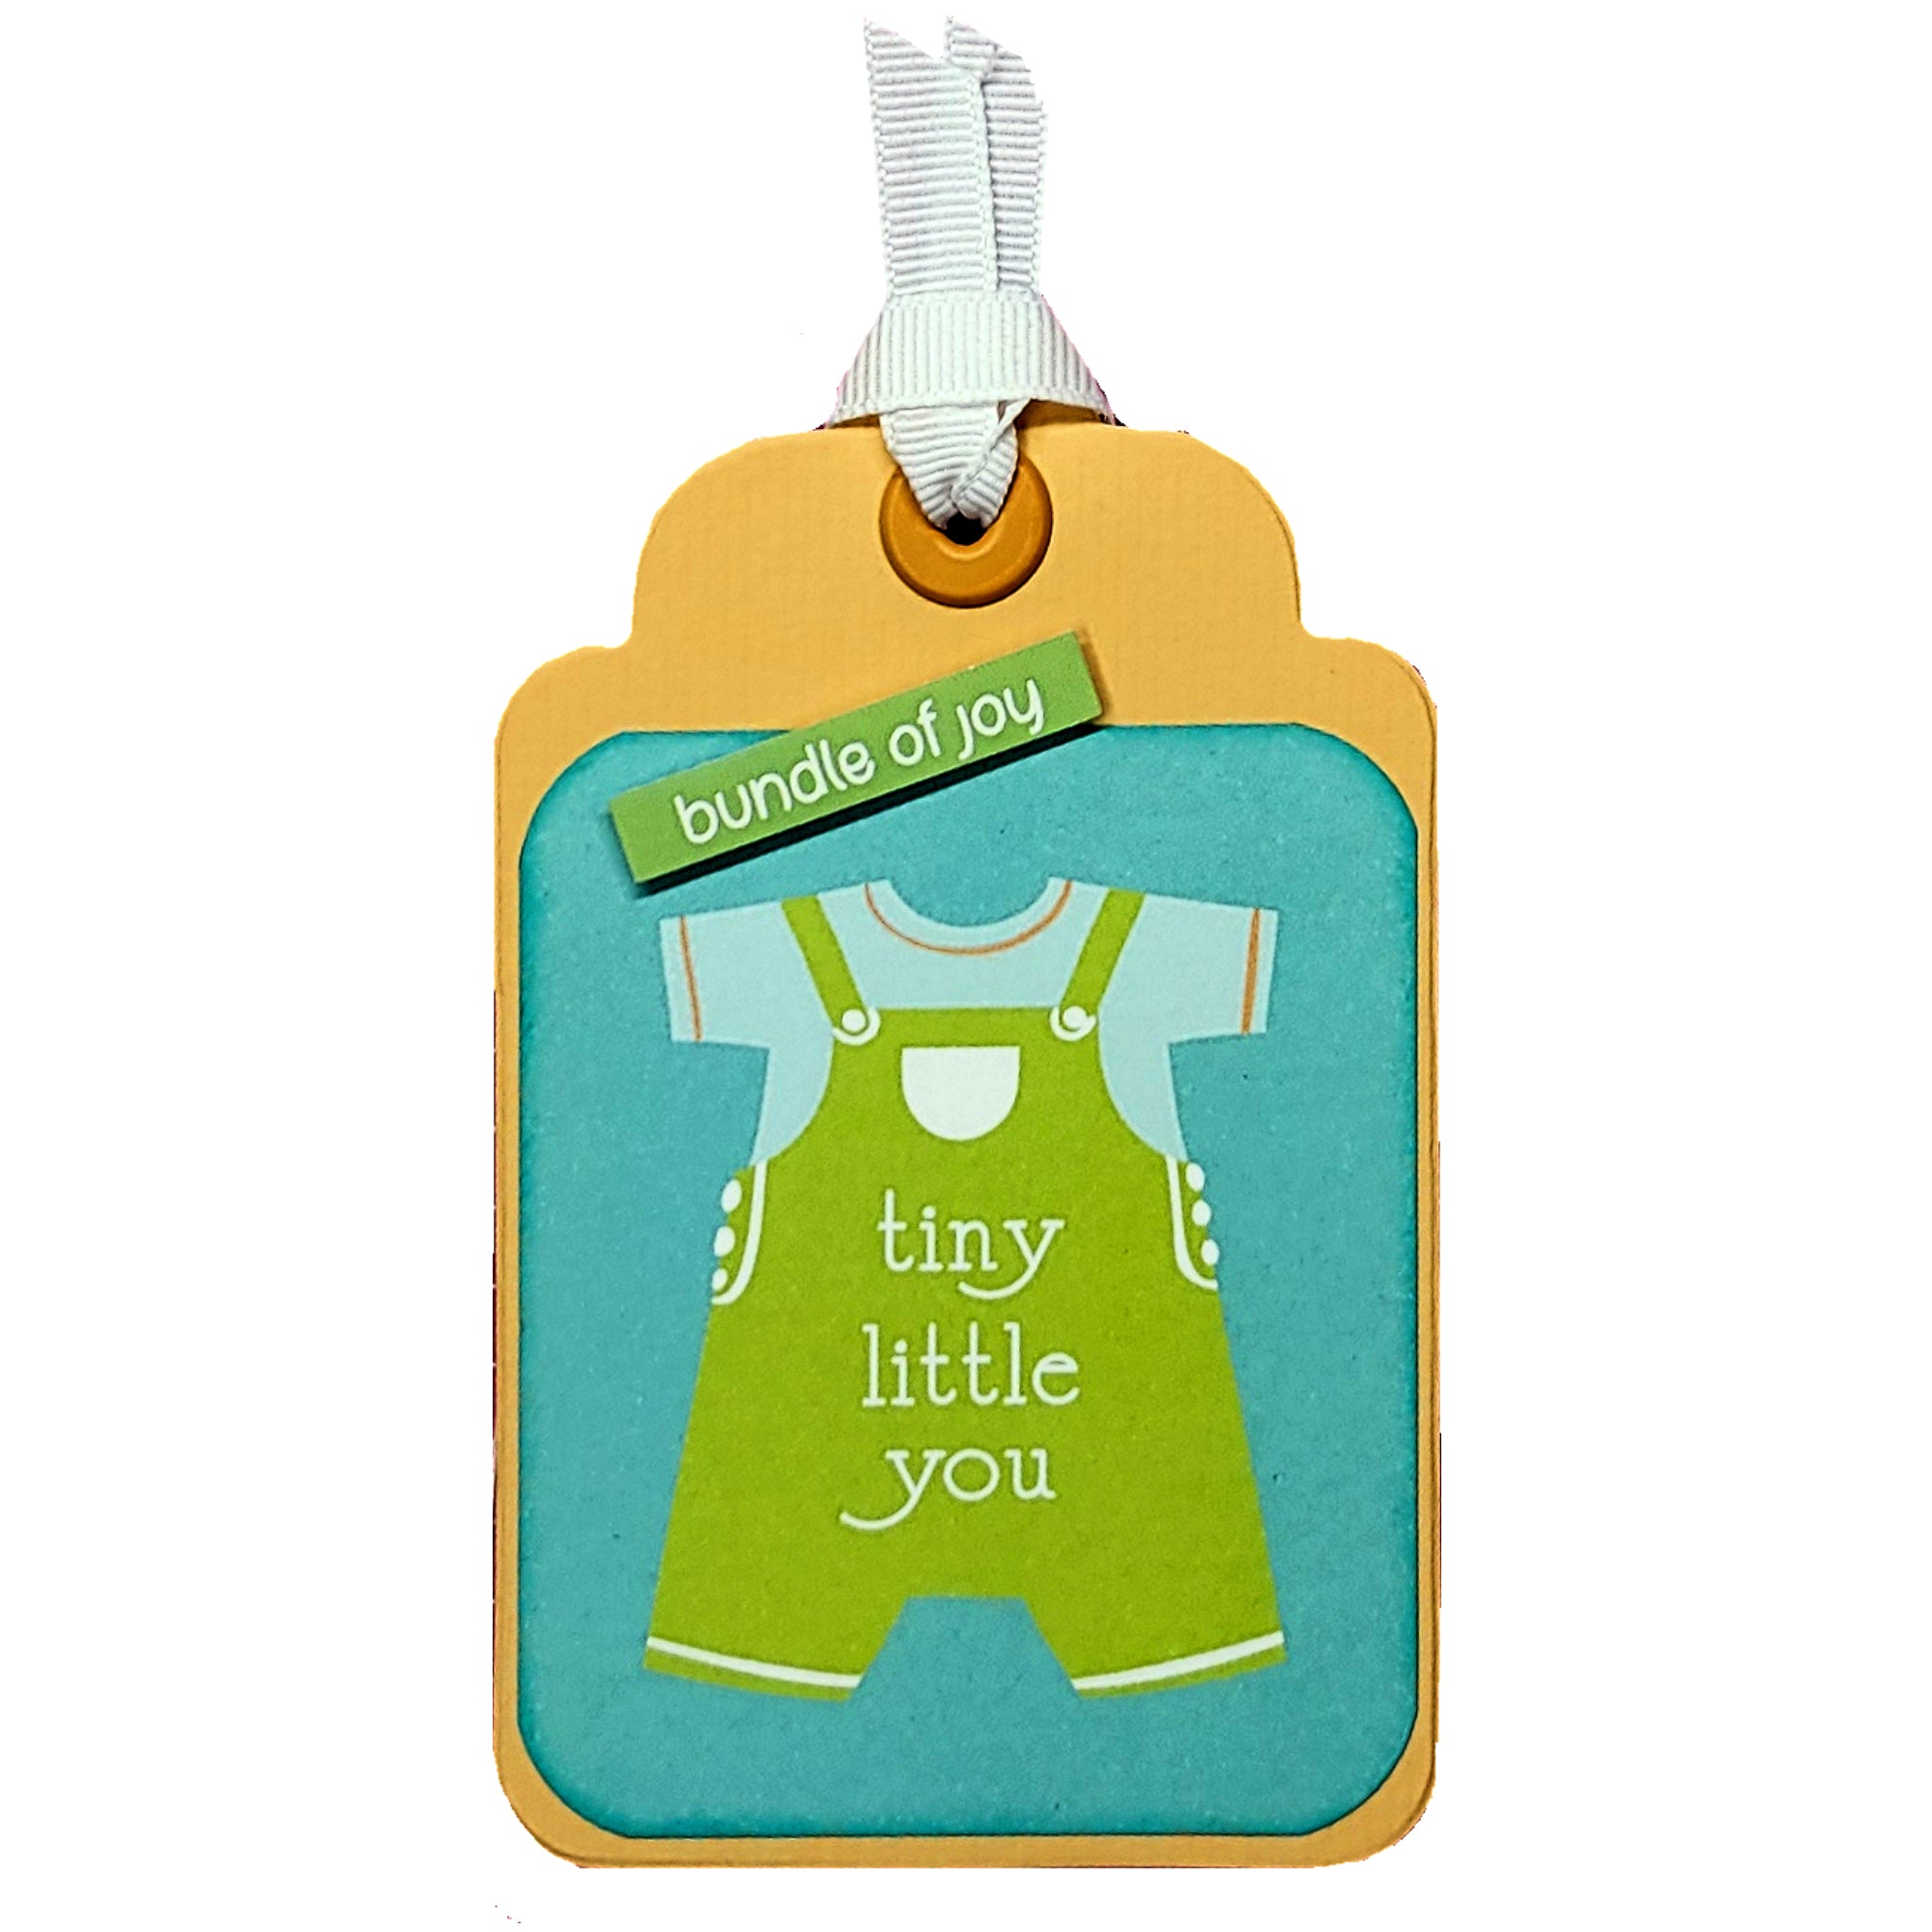 Hush Little Baby Collection 3 x 5 Bundle of Joy Tag Scrapbook Embellishment by SSC Designs